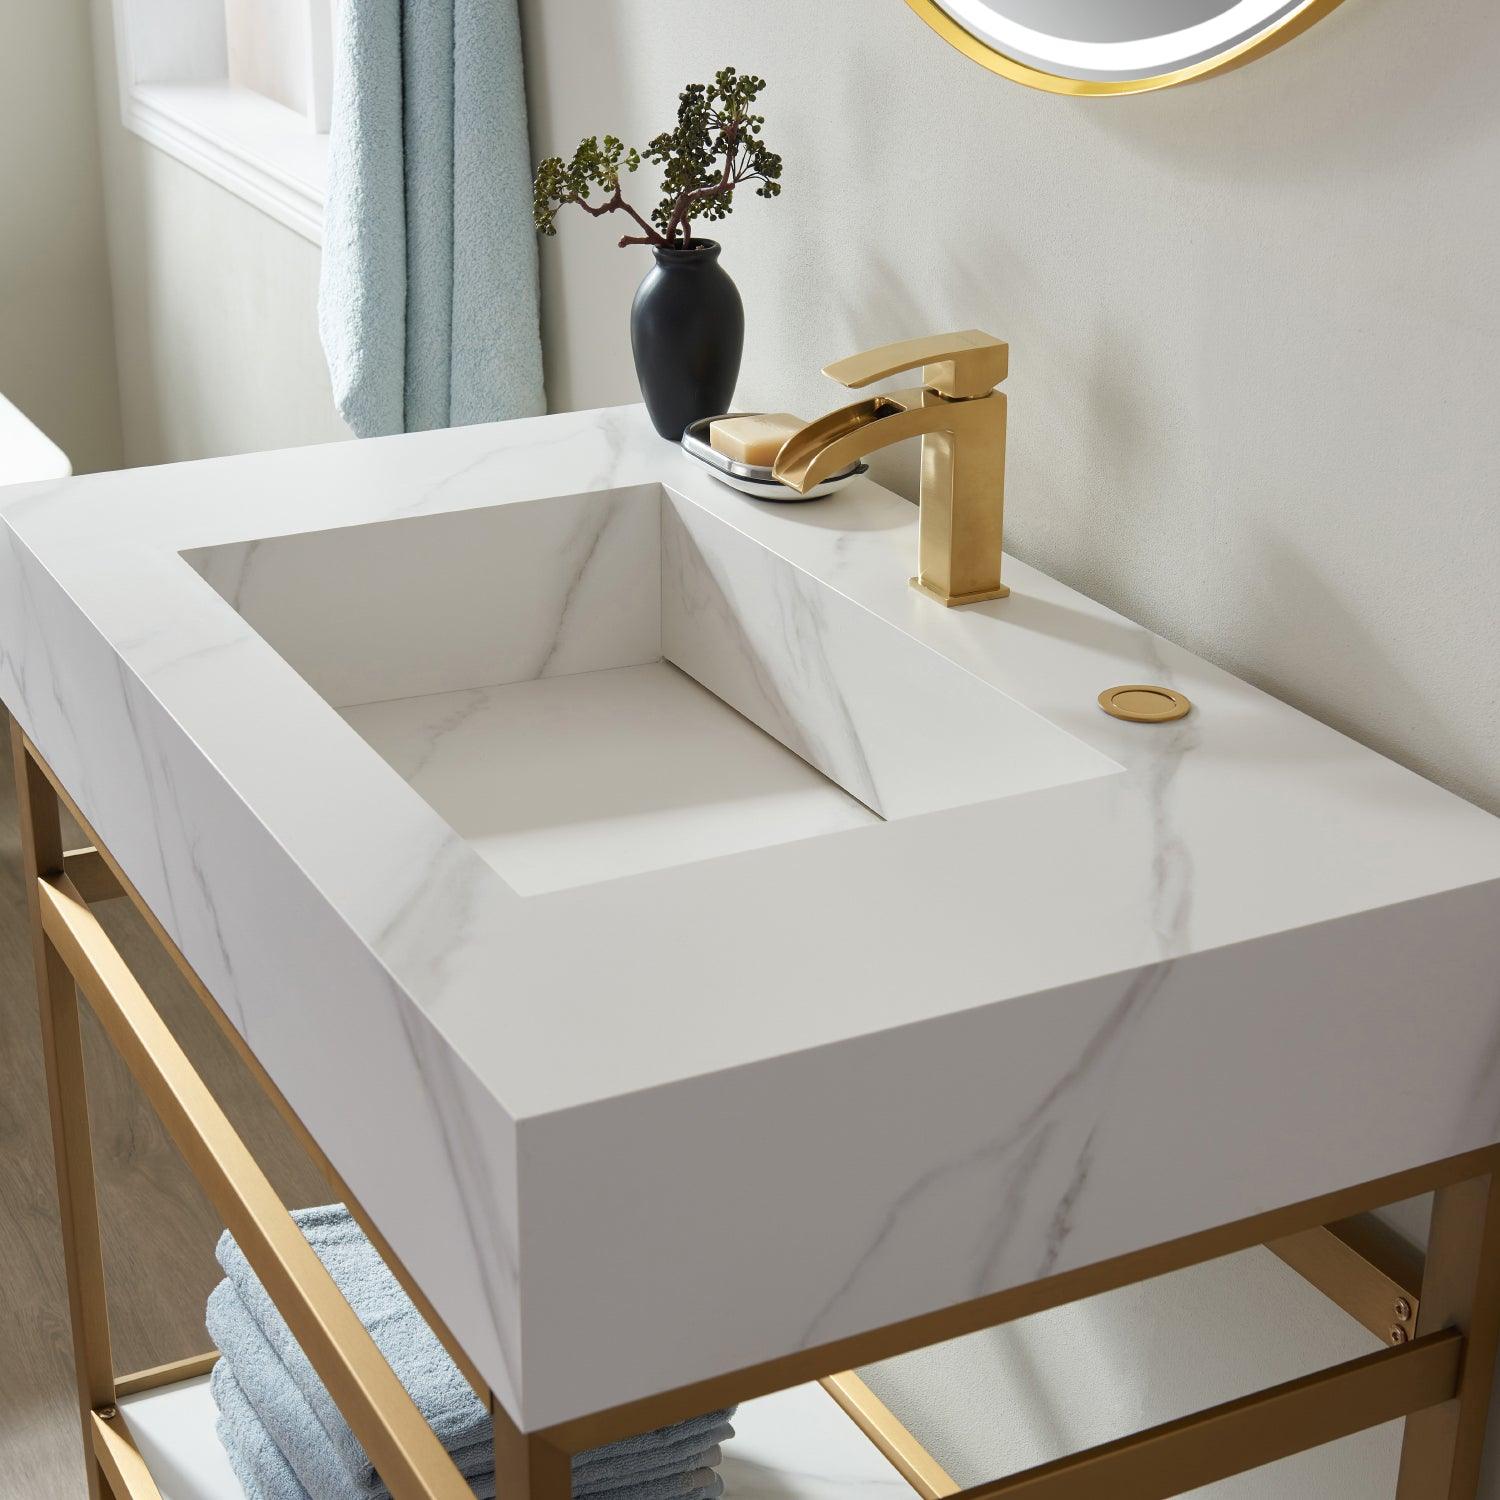 Vinnova Alicante Single Vanity with Brushed-gold stainless steel bracket match with Snow mountain-white stone Countertop - Sea & Stone Bath